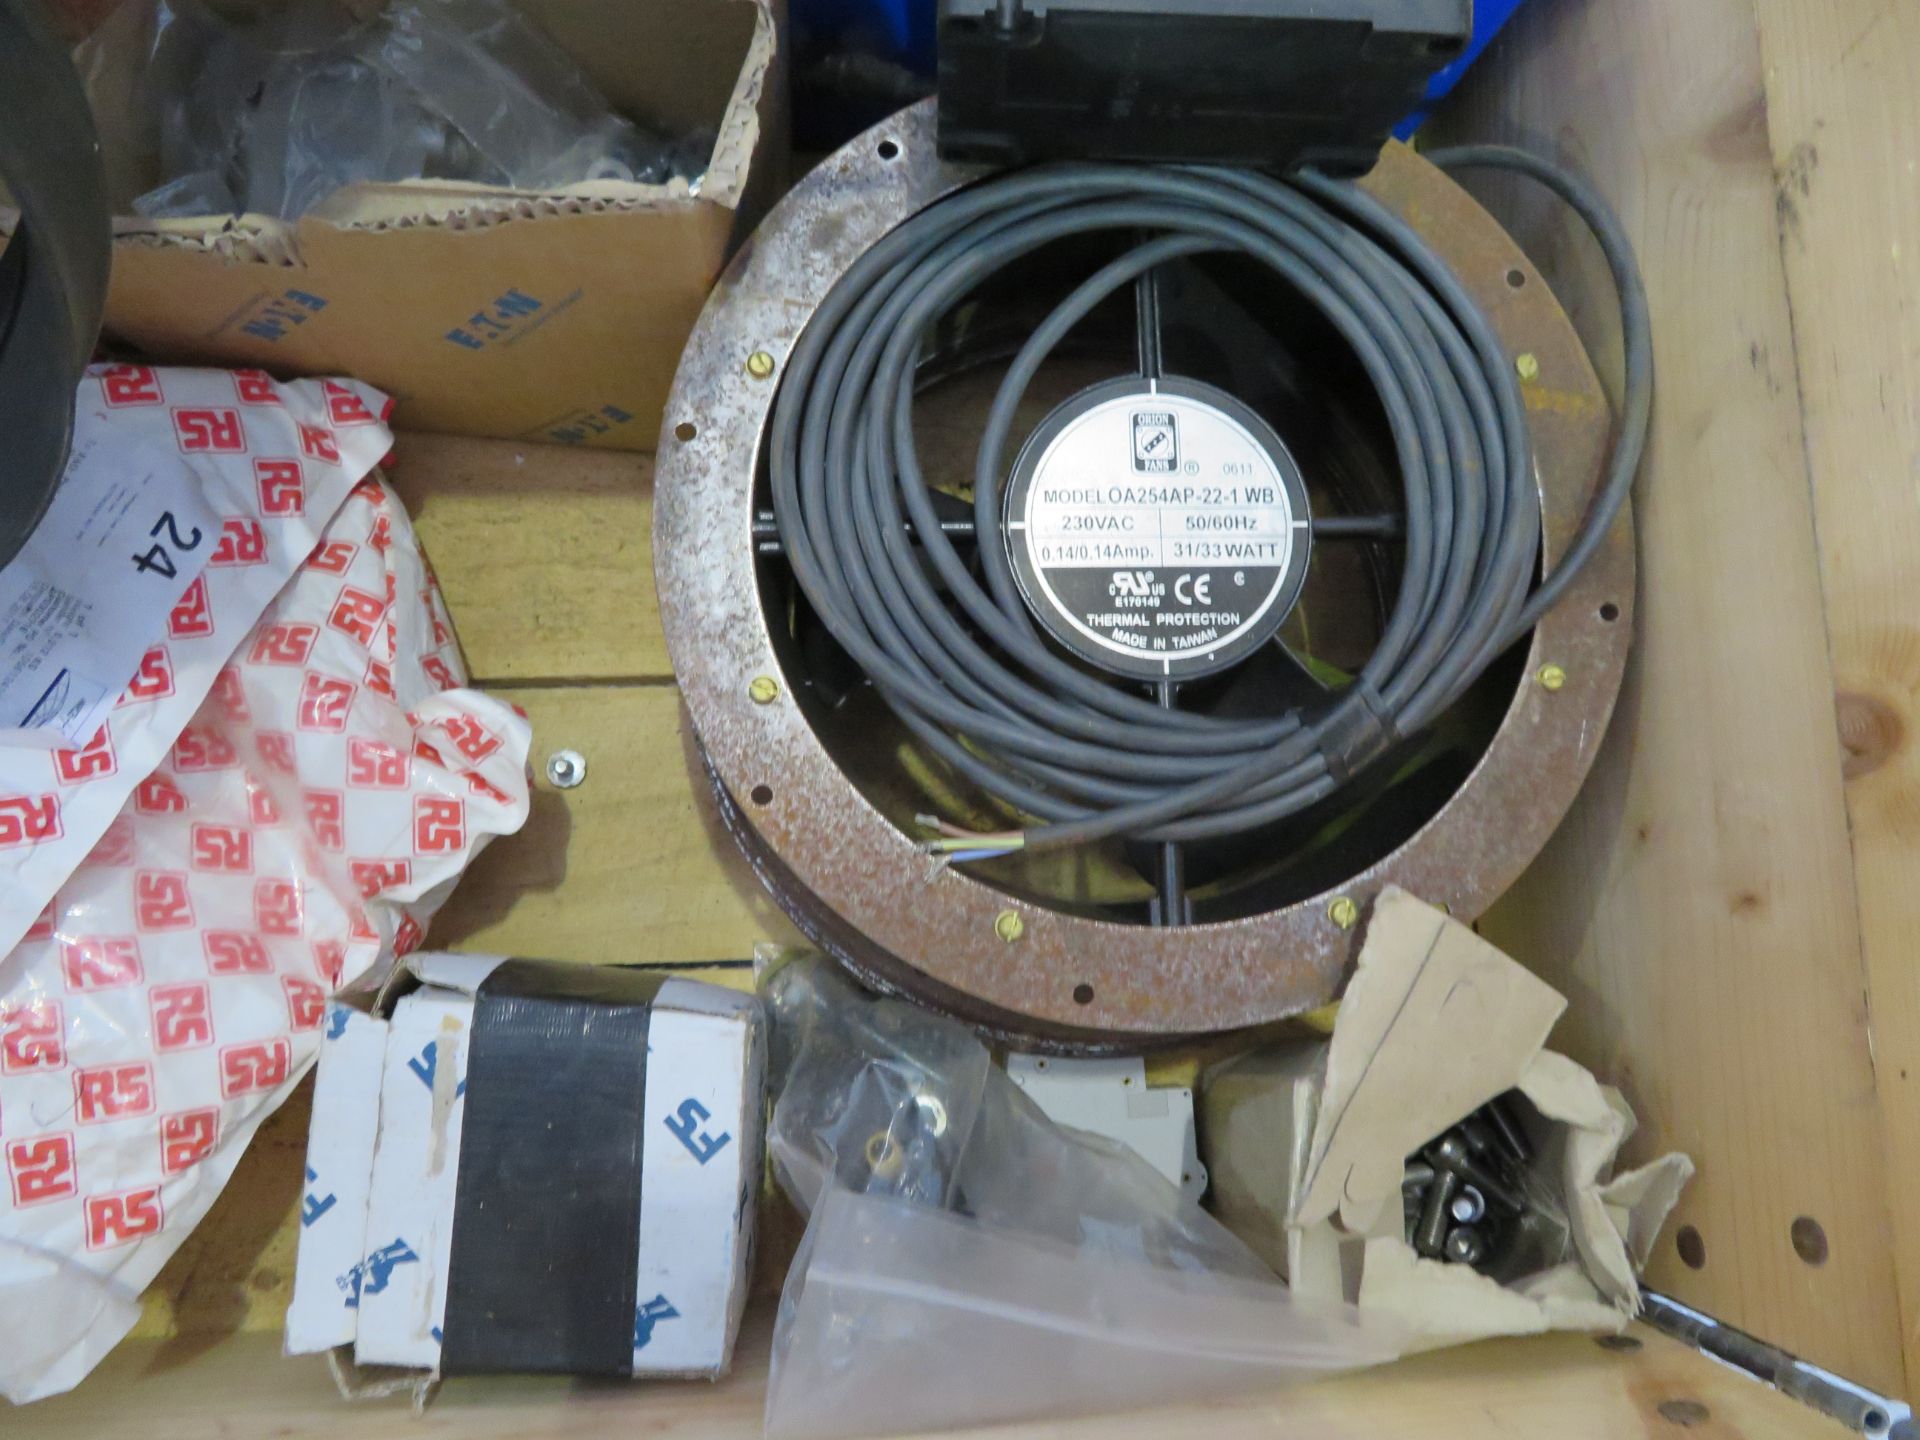 ASSORTED ELECTRICAL SPARES INCLUDING CABLE, FAN, FIXINGS ETC - Image 5 of 5